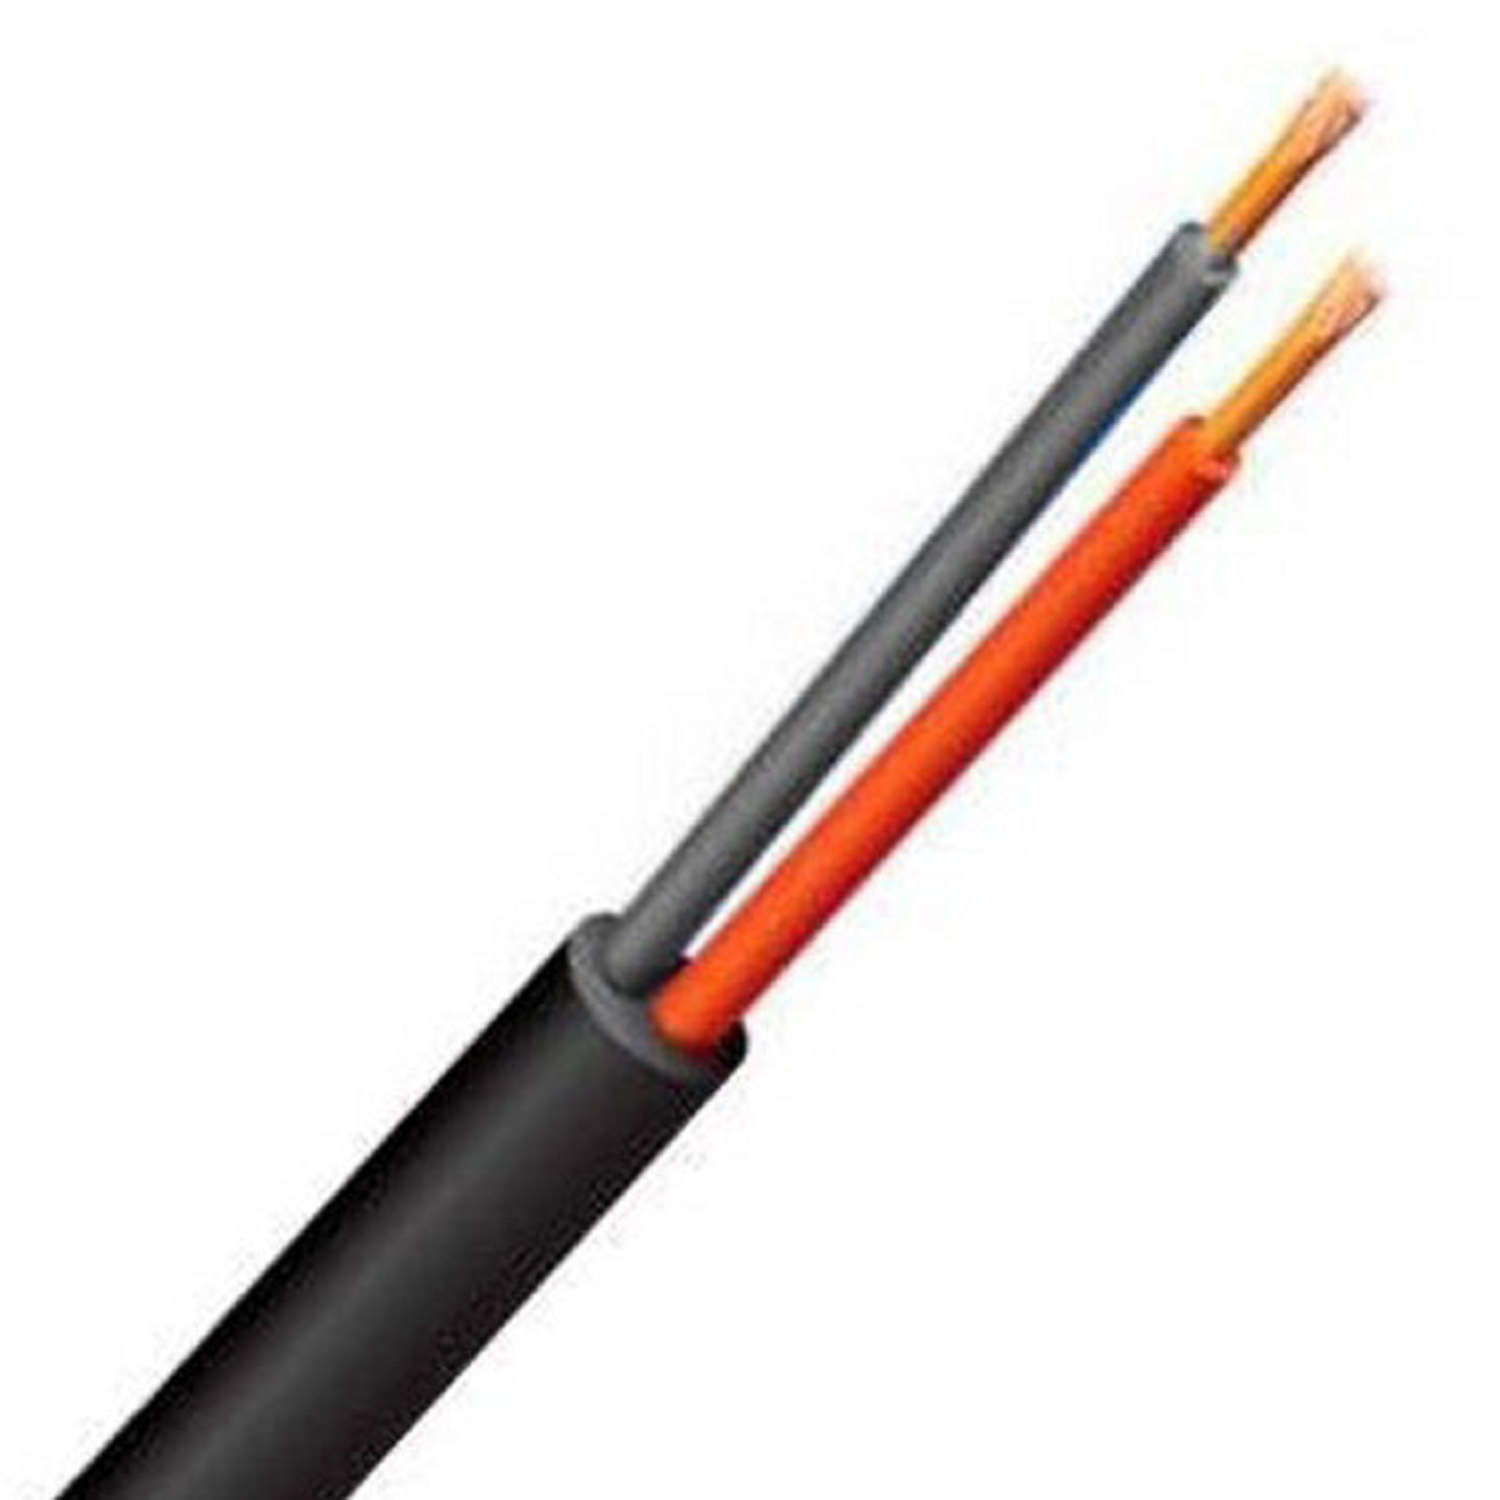 1.0 Sqmm Polycab Copper Flexible Cable (11 KV) With PVC Insulated Sheathed - Black